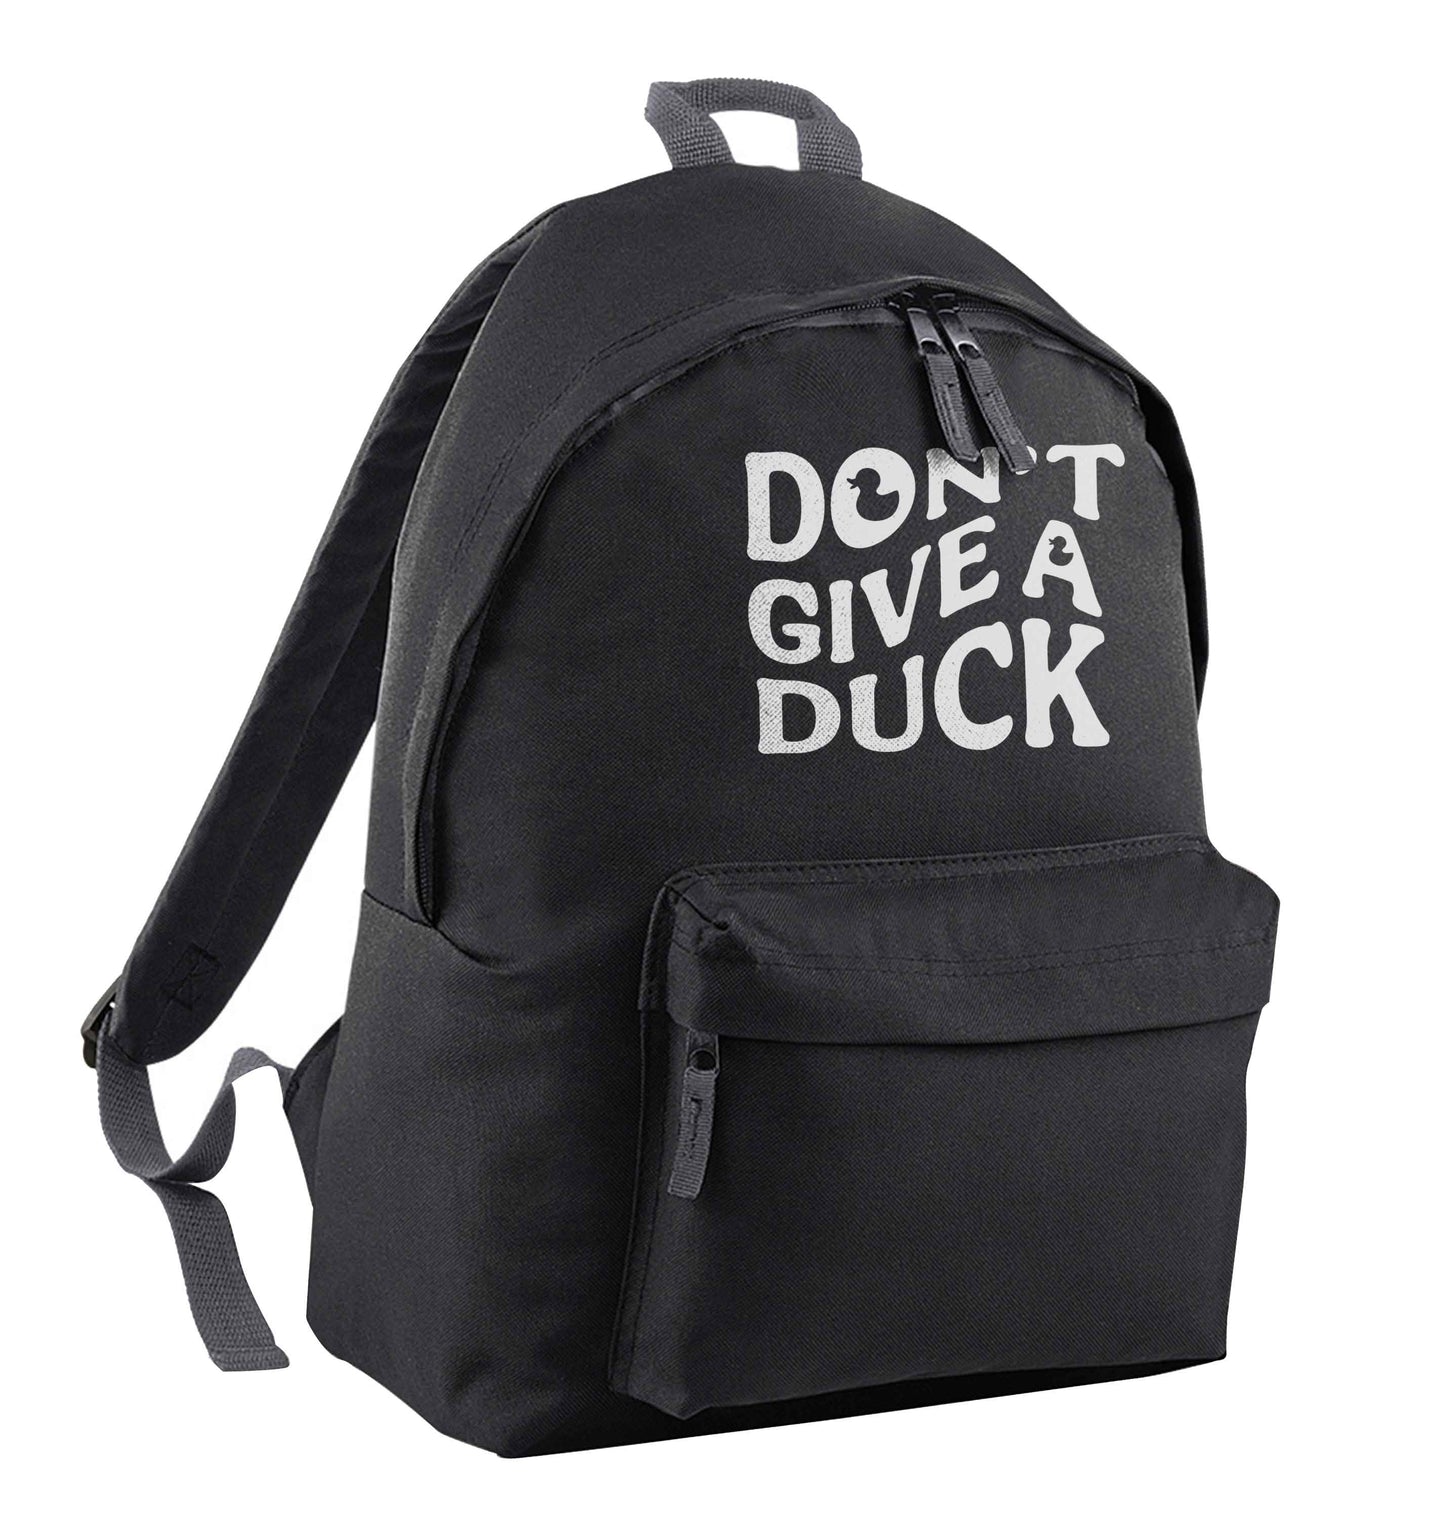 Don't give a duck black children's backpack